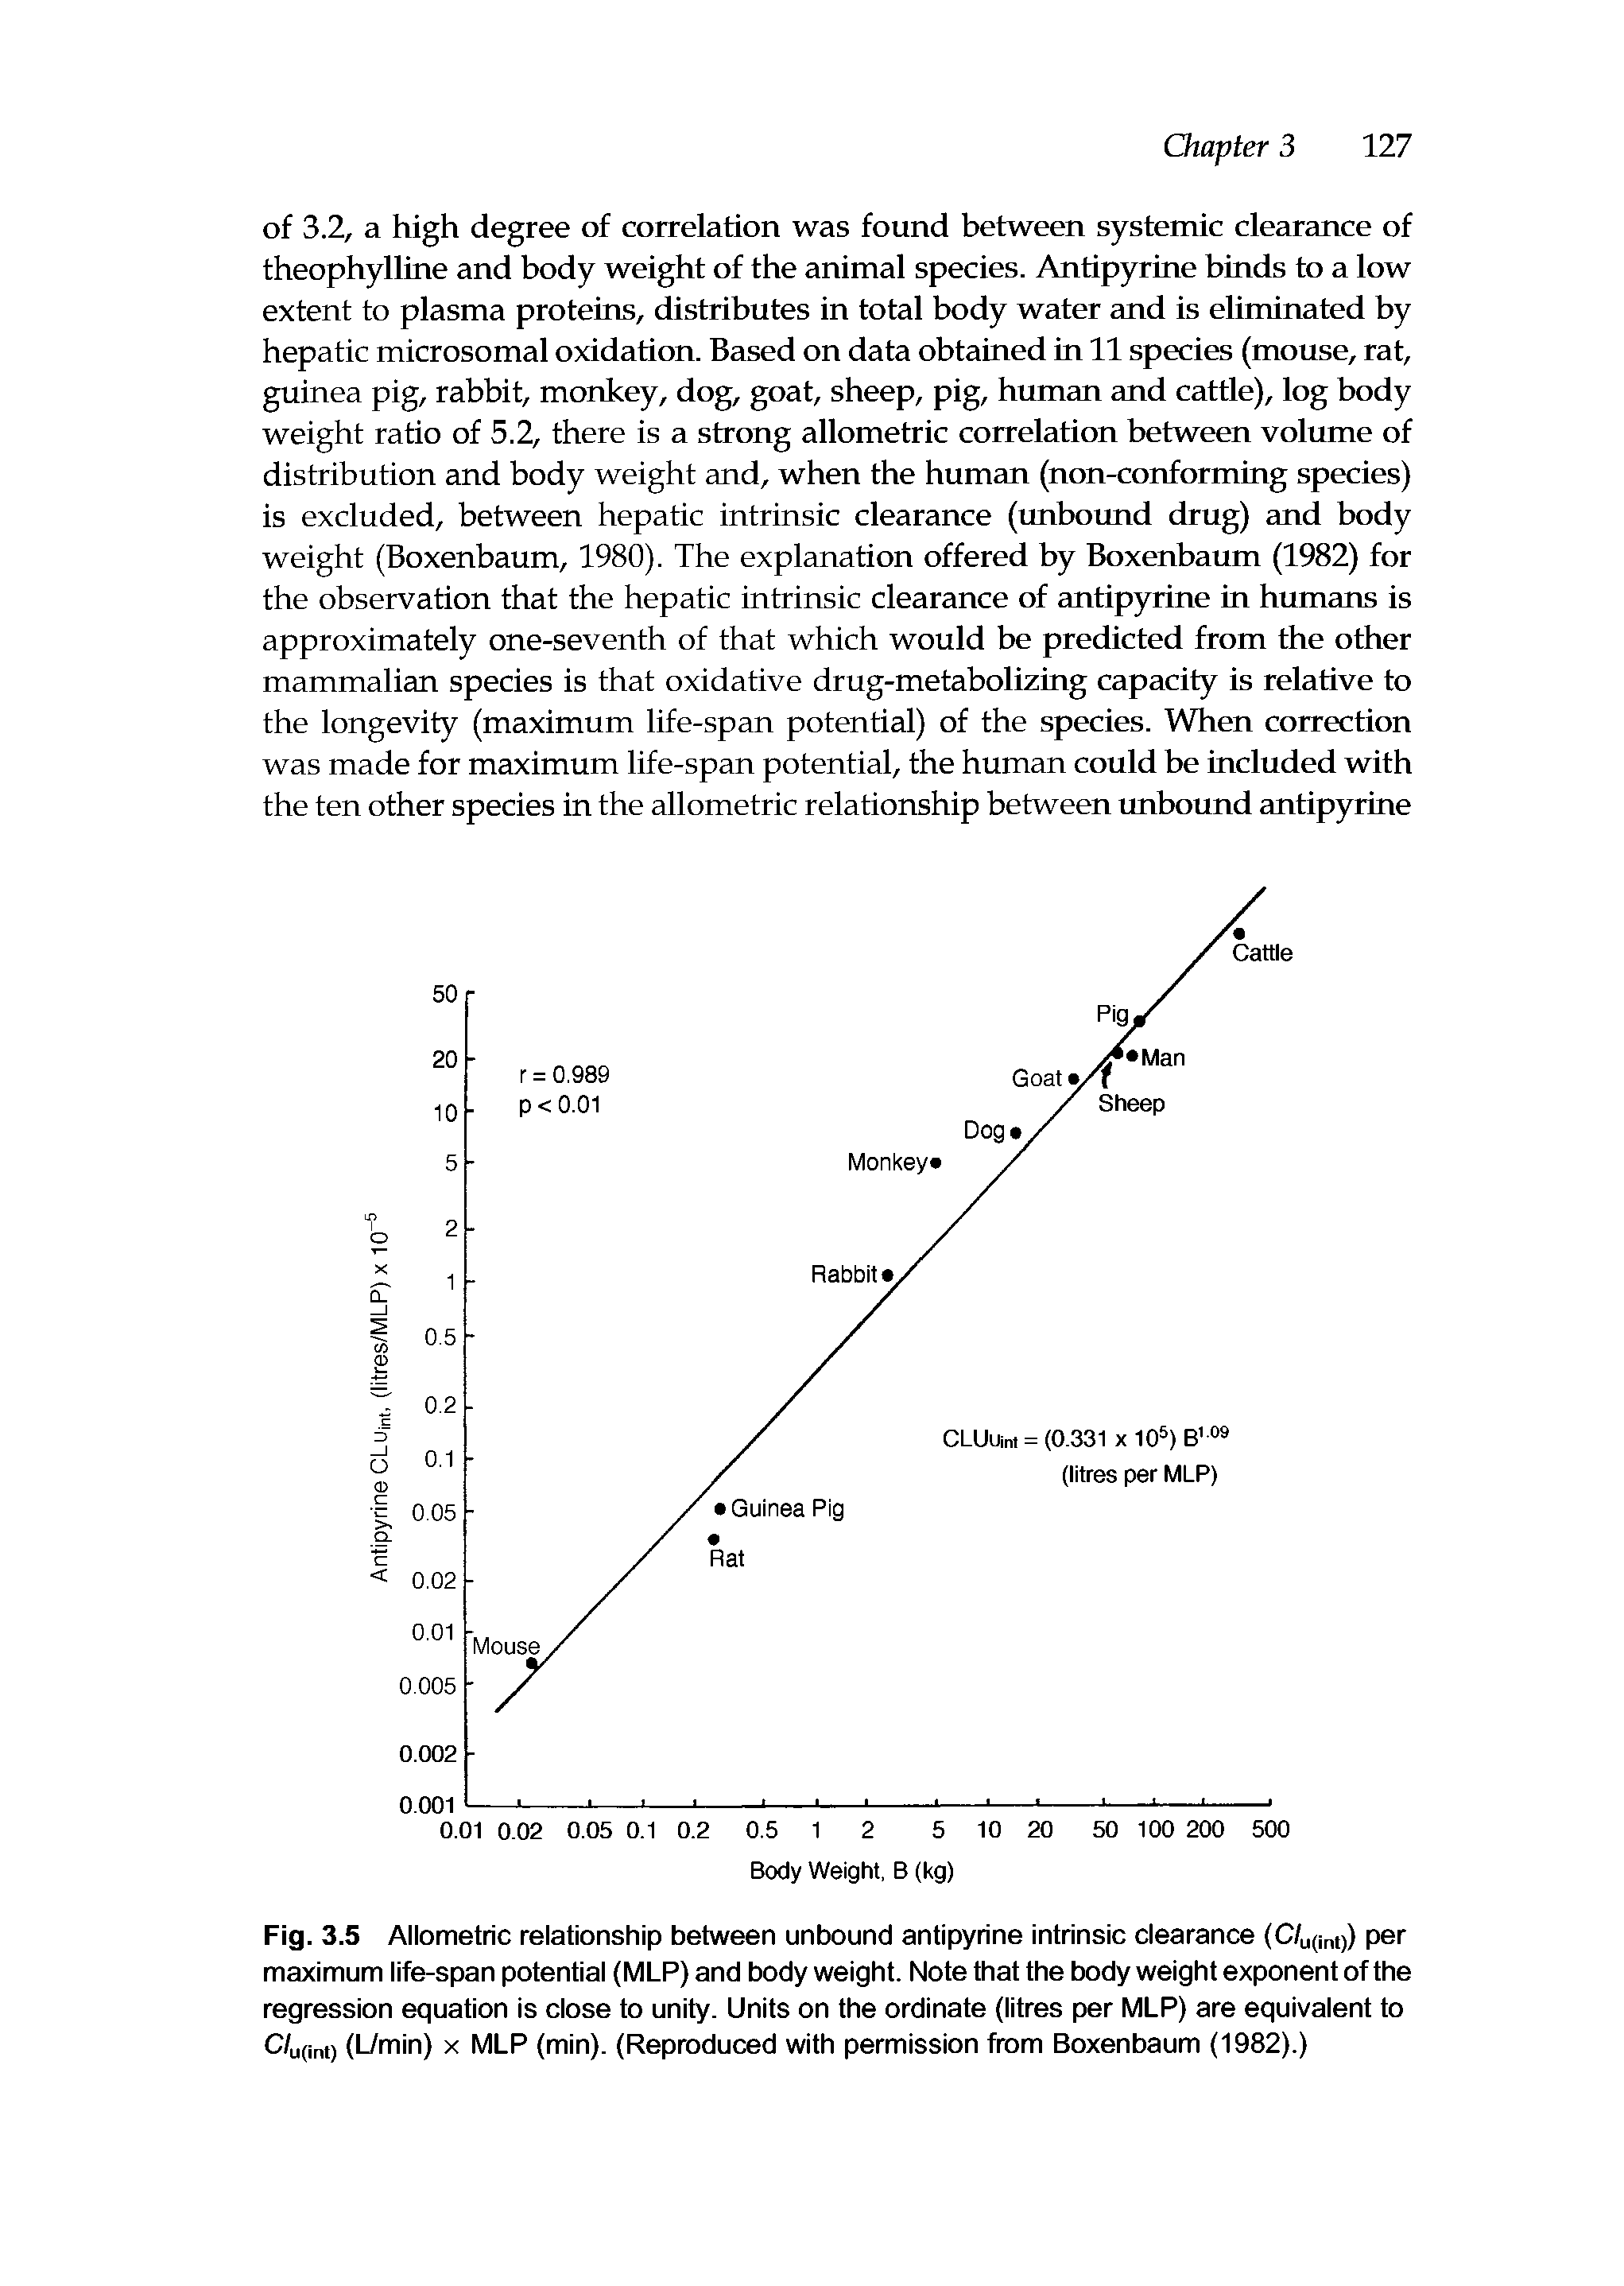 Fig. 3.5 Allometric relationship between unbound antipyrine intrinsic clearance (C/U(int)) per maximum life-span potential (MLP) and body weight. Note that the body weight exponent of the regression equation is close to unity. Units on the ordinate (litres per MLP) are equivalent to C/U(int) (L/min) x MLP (min). (Reproduced with permission from Boxenbaum (1982).)...